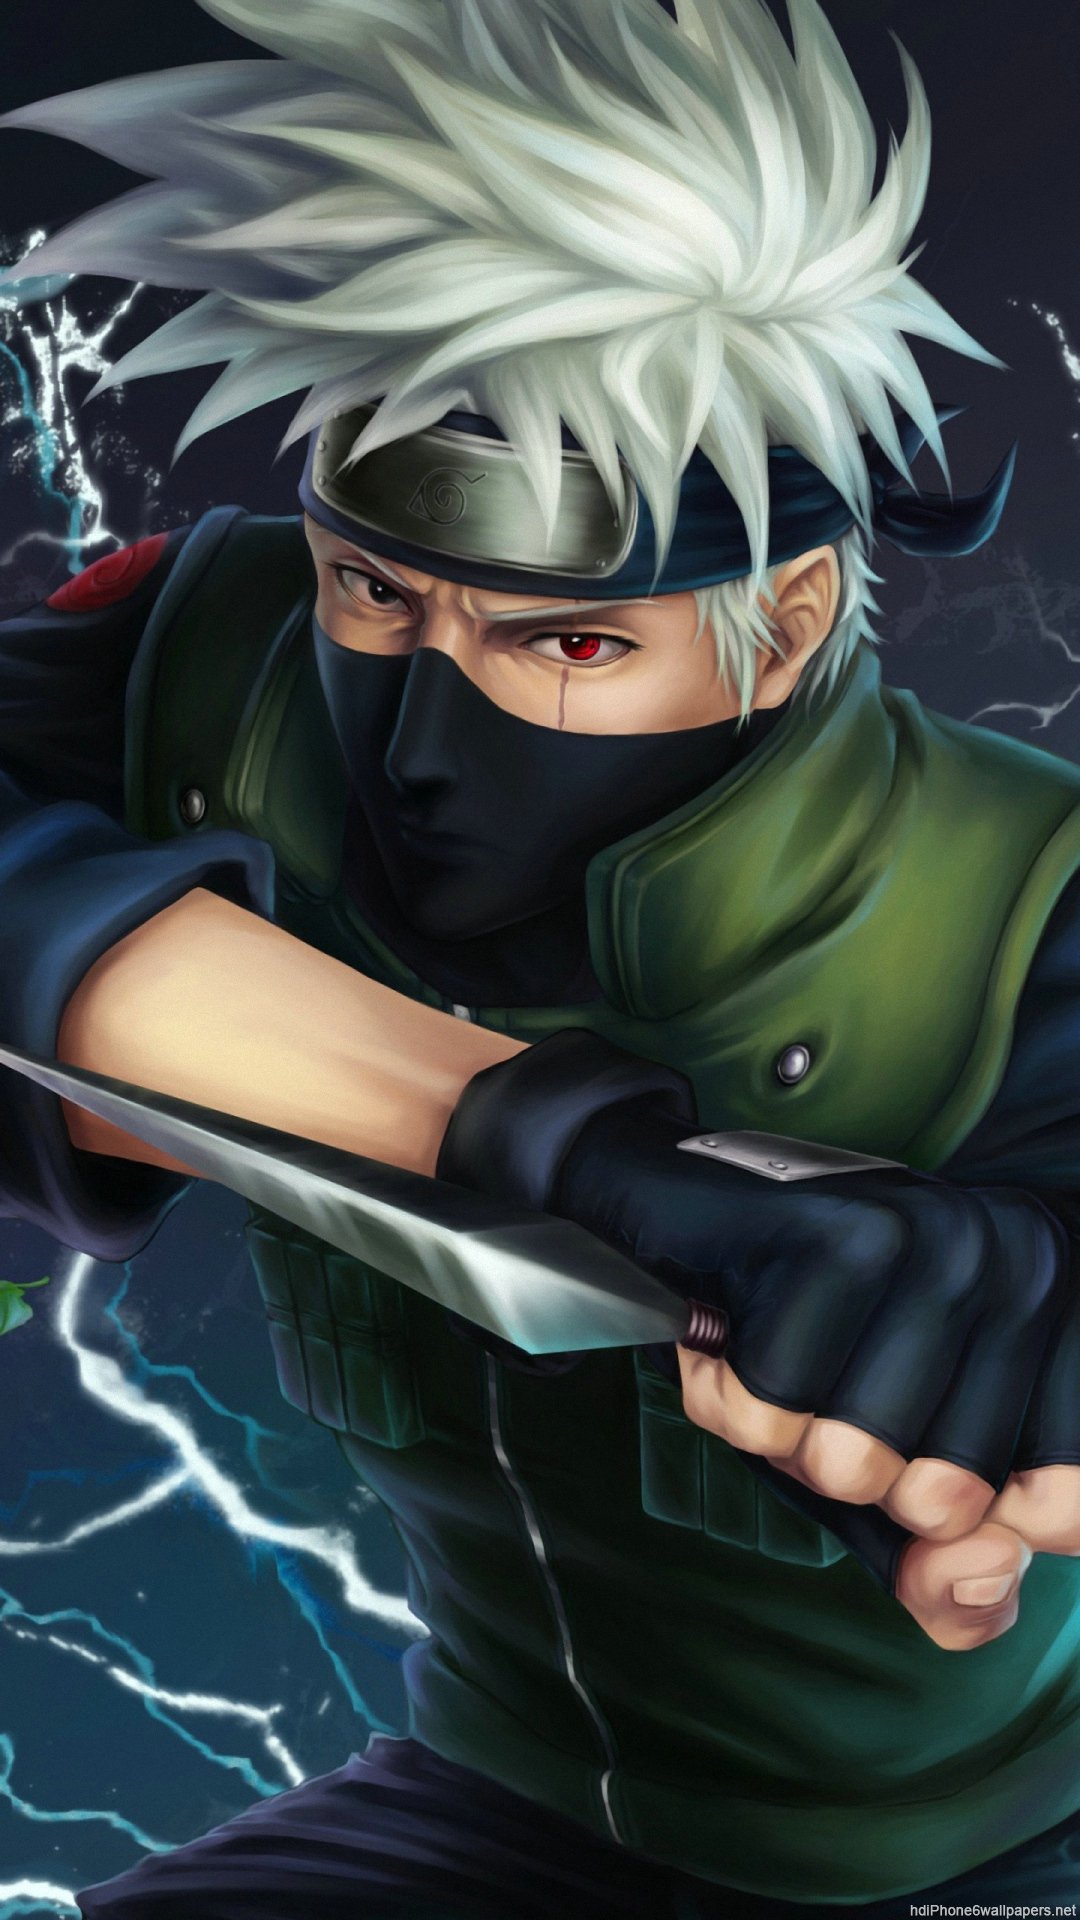 Free Download 1080x1920 Naruto 3d Anime Iphone 6 Wallpapers Hd